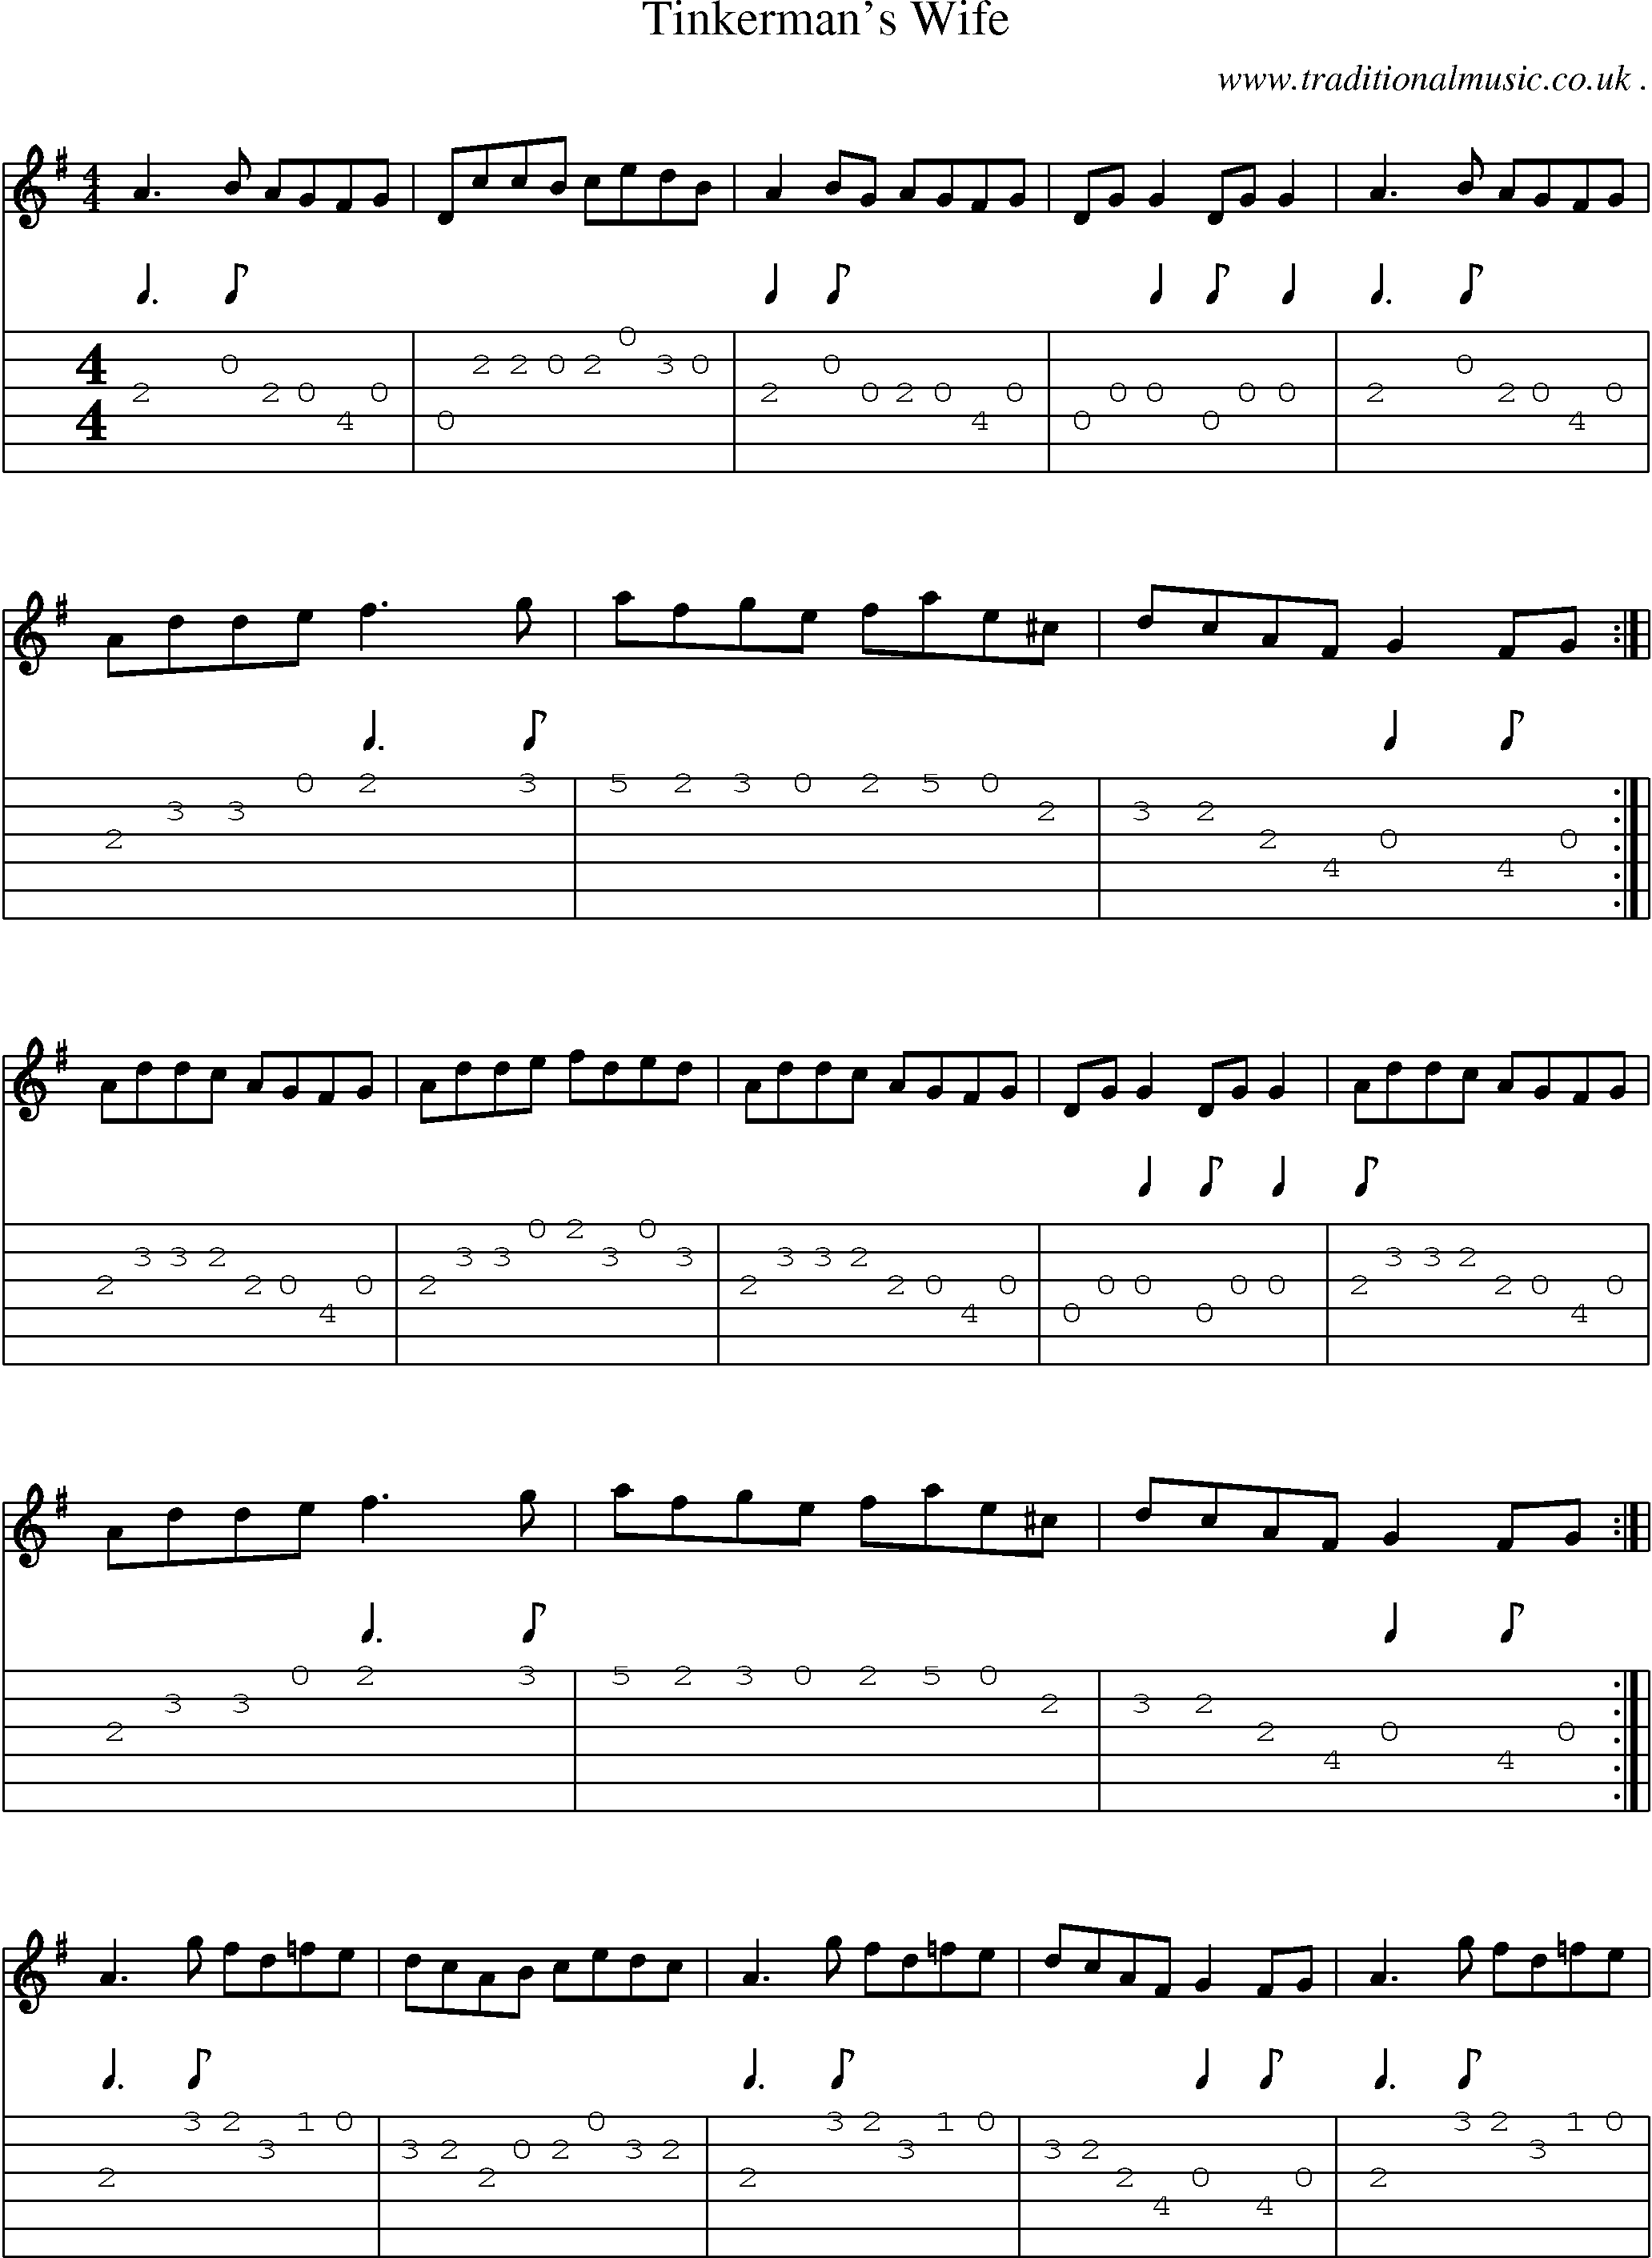 Sheet-Music and Guitar Tabs for Tinkermans Wife